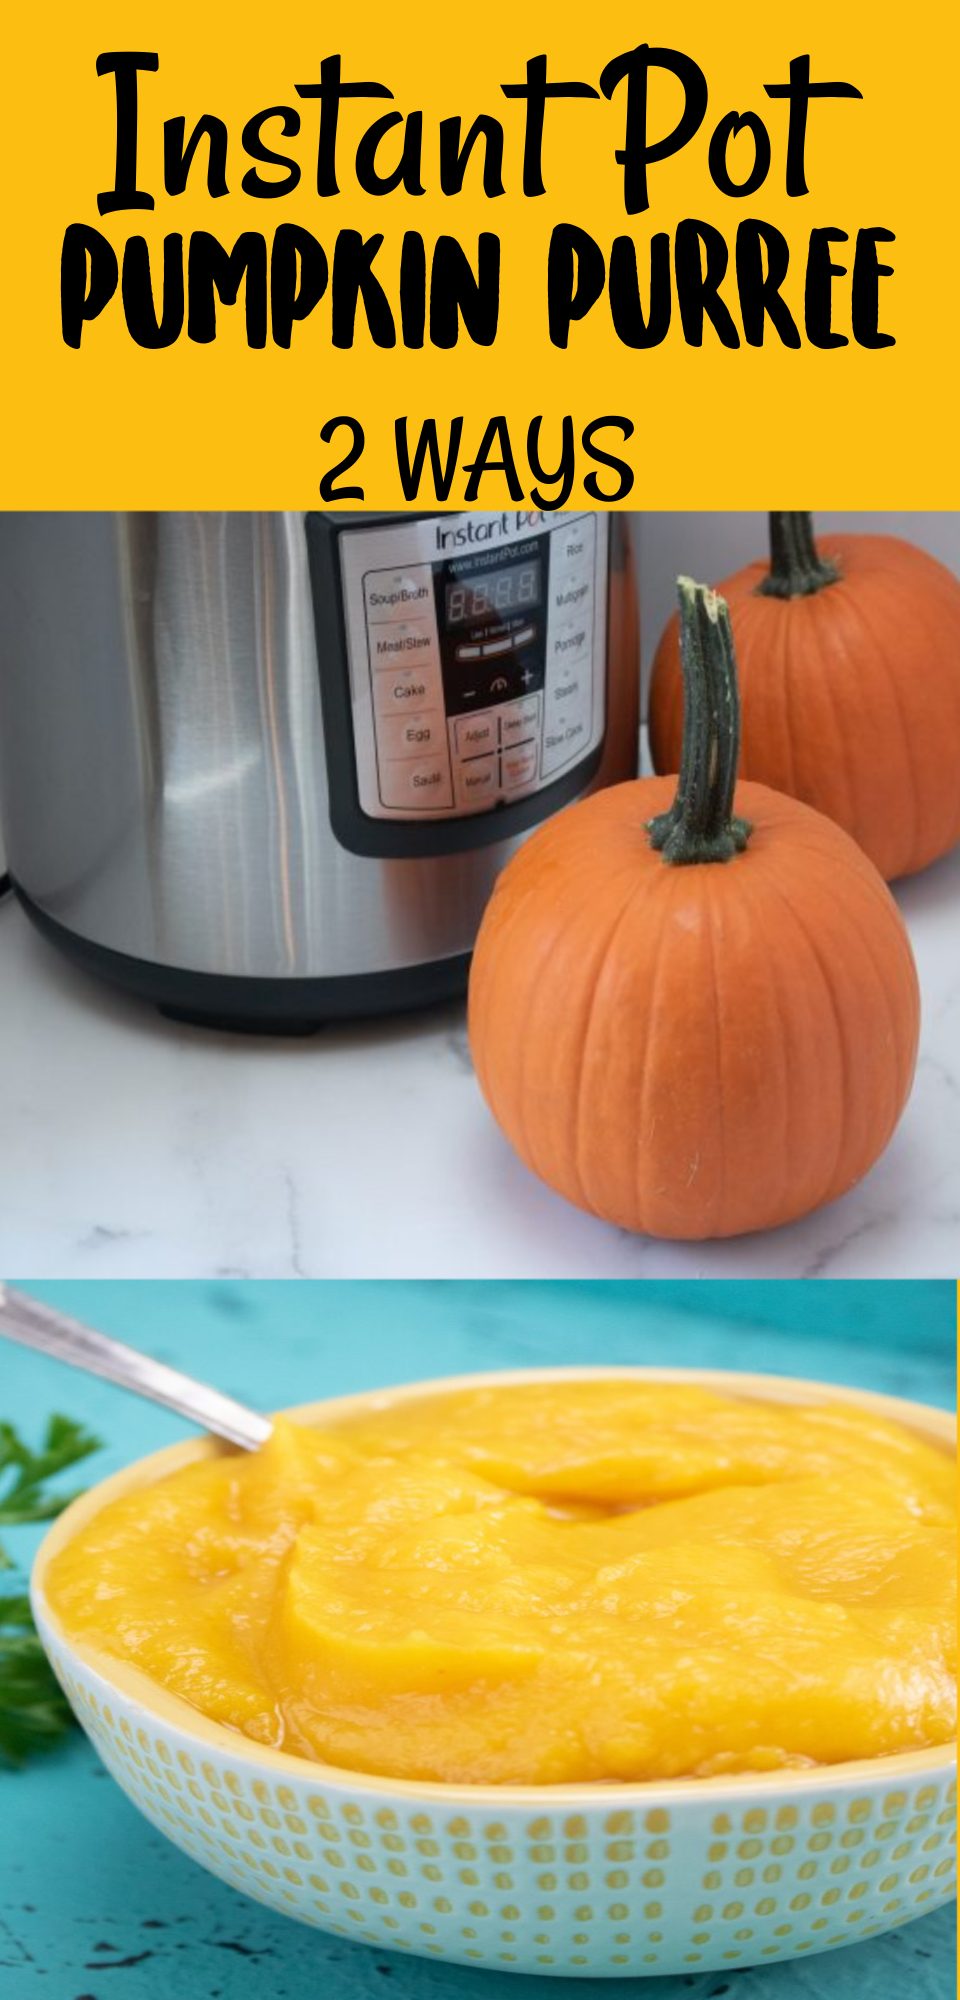 Fresh pumpkin puree is a must-have for fall! This easy pumpkin puree recipe can be added to any recipes that require pumpkin and it is so much better than the canned ones. Try this quick instant pot pumpkin puree recipe out!